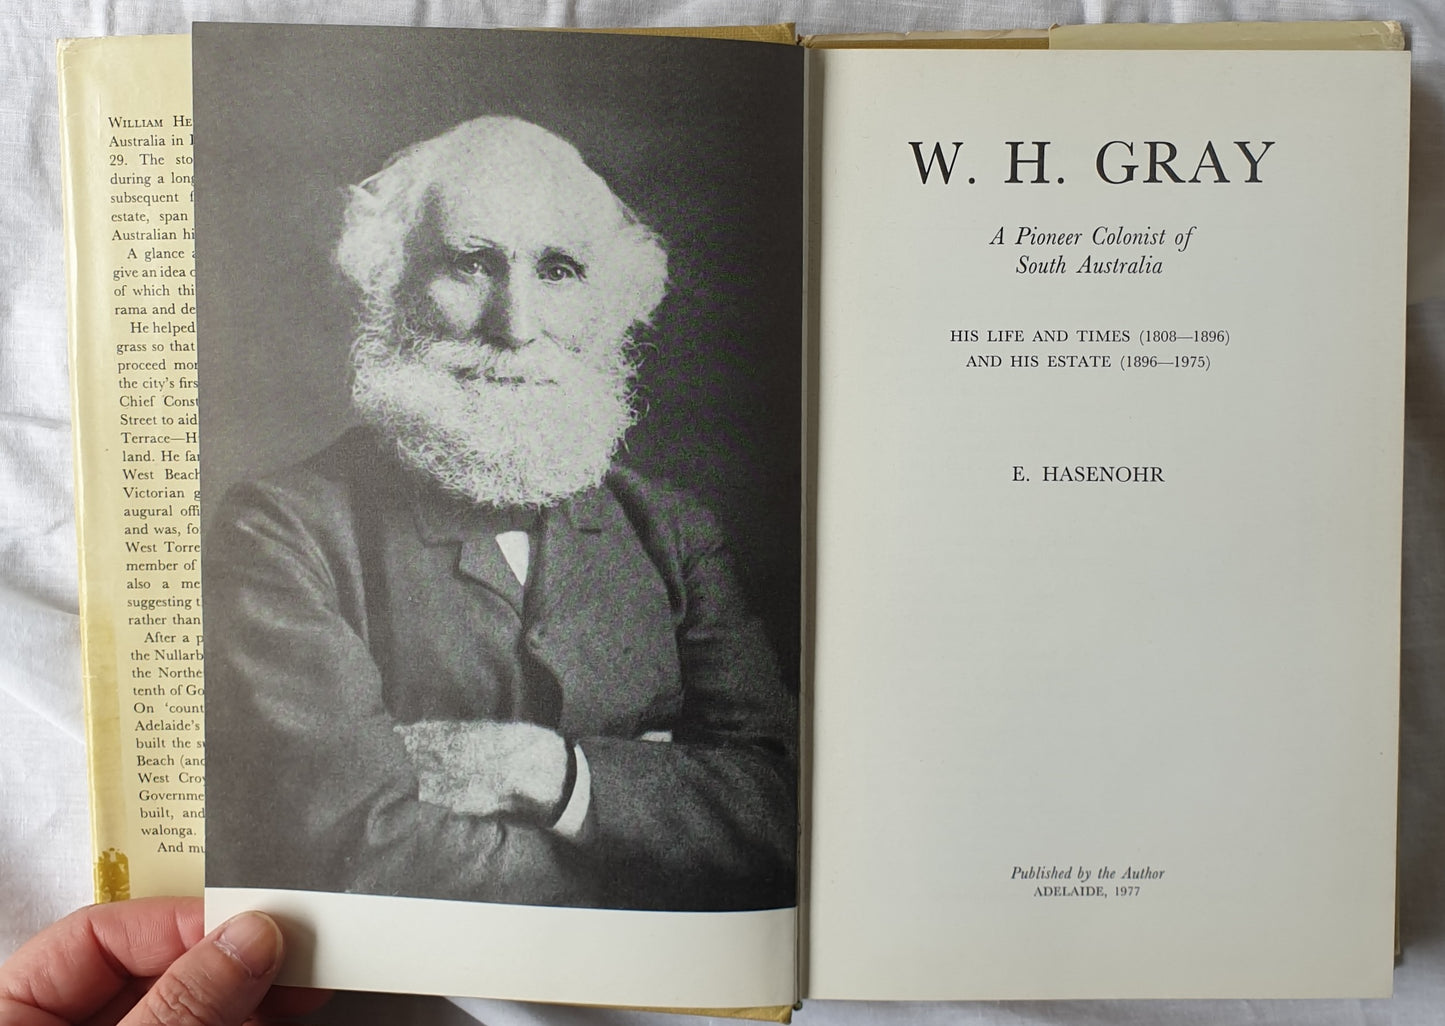 W. H. Gray  A Pioneer Colonist of South Australia  His Life and Times (1808-1896) And His Estate (1896-1975)  by E. Hasenohr